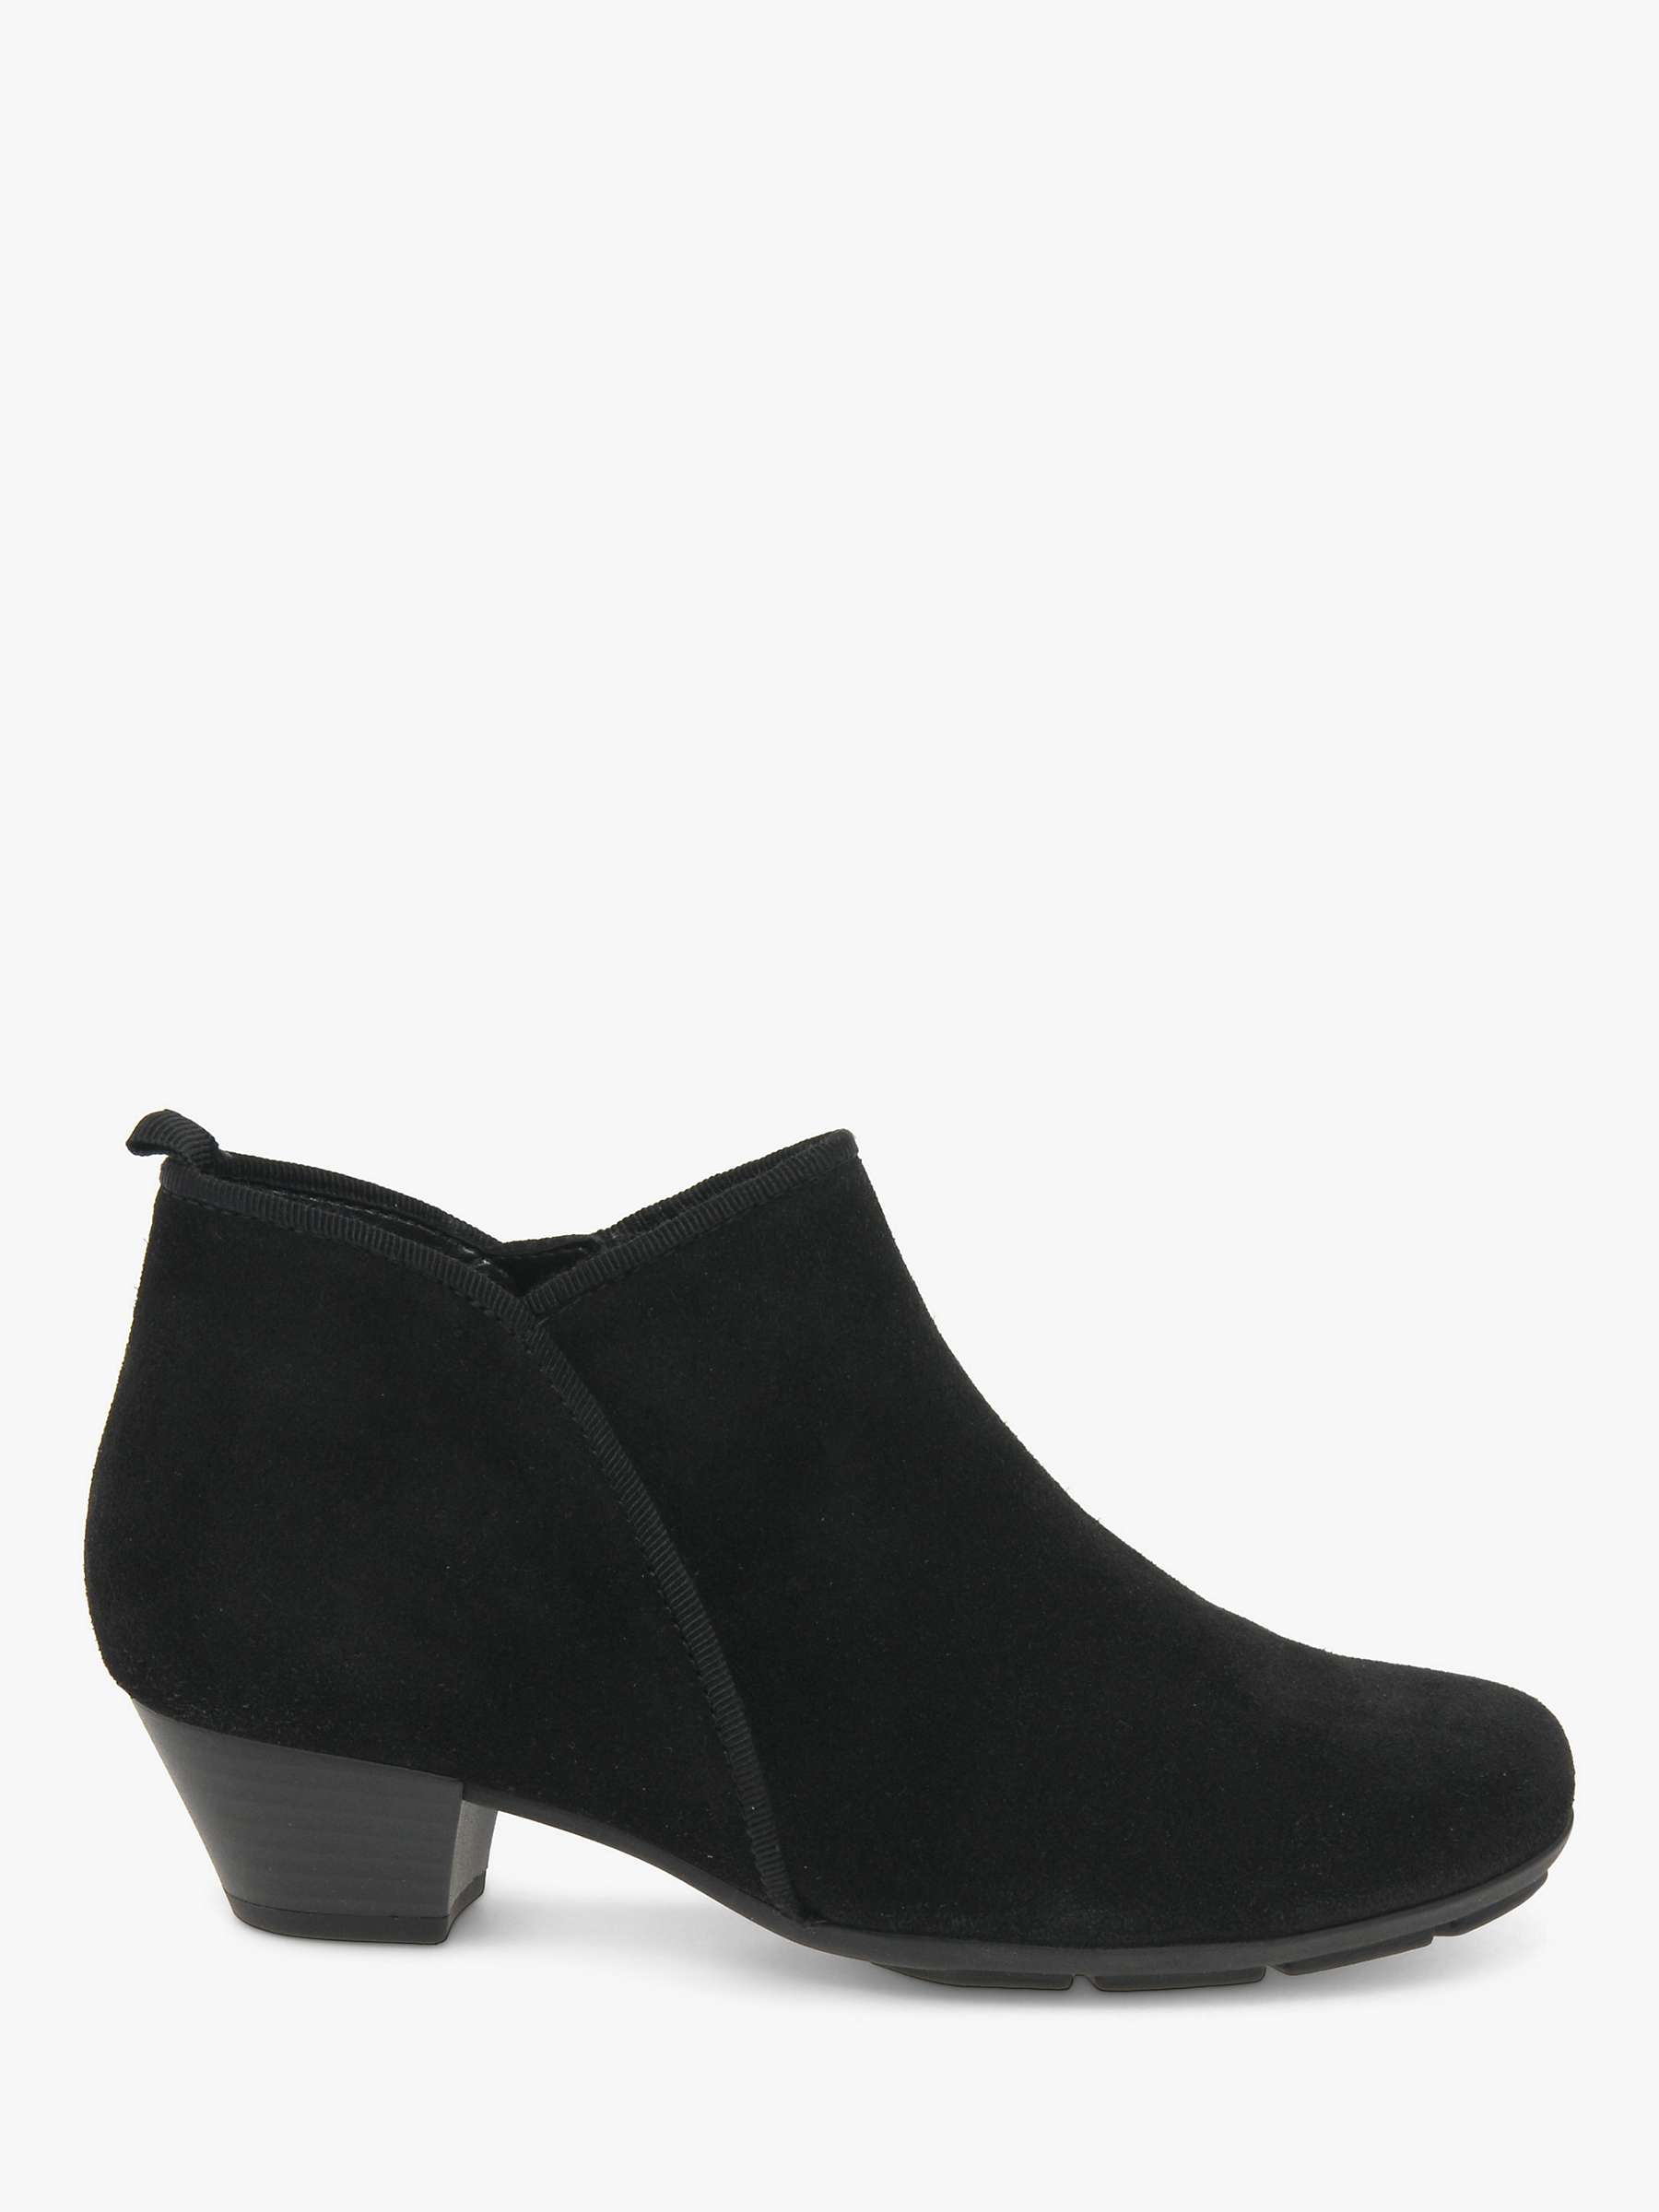 Buy Gabor Trudy Suede Ankle Boots, Black Online at johnlewis.com